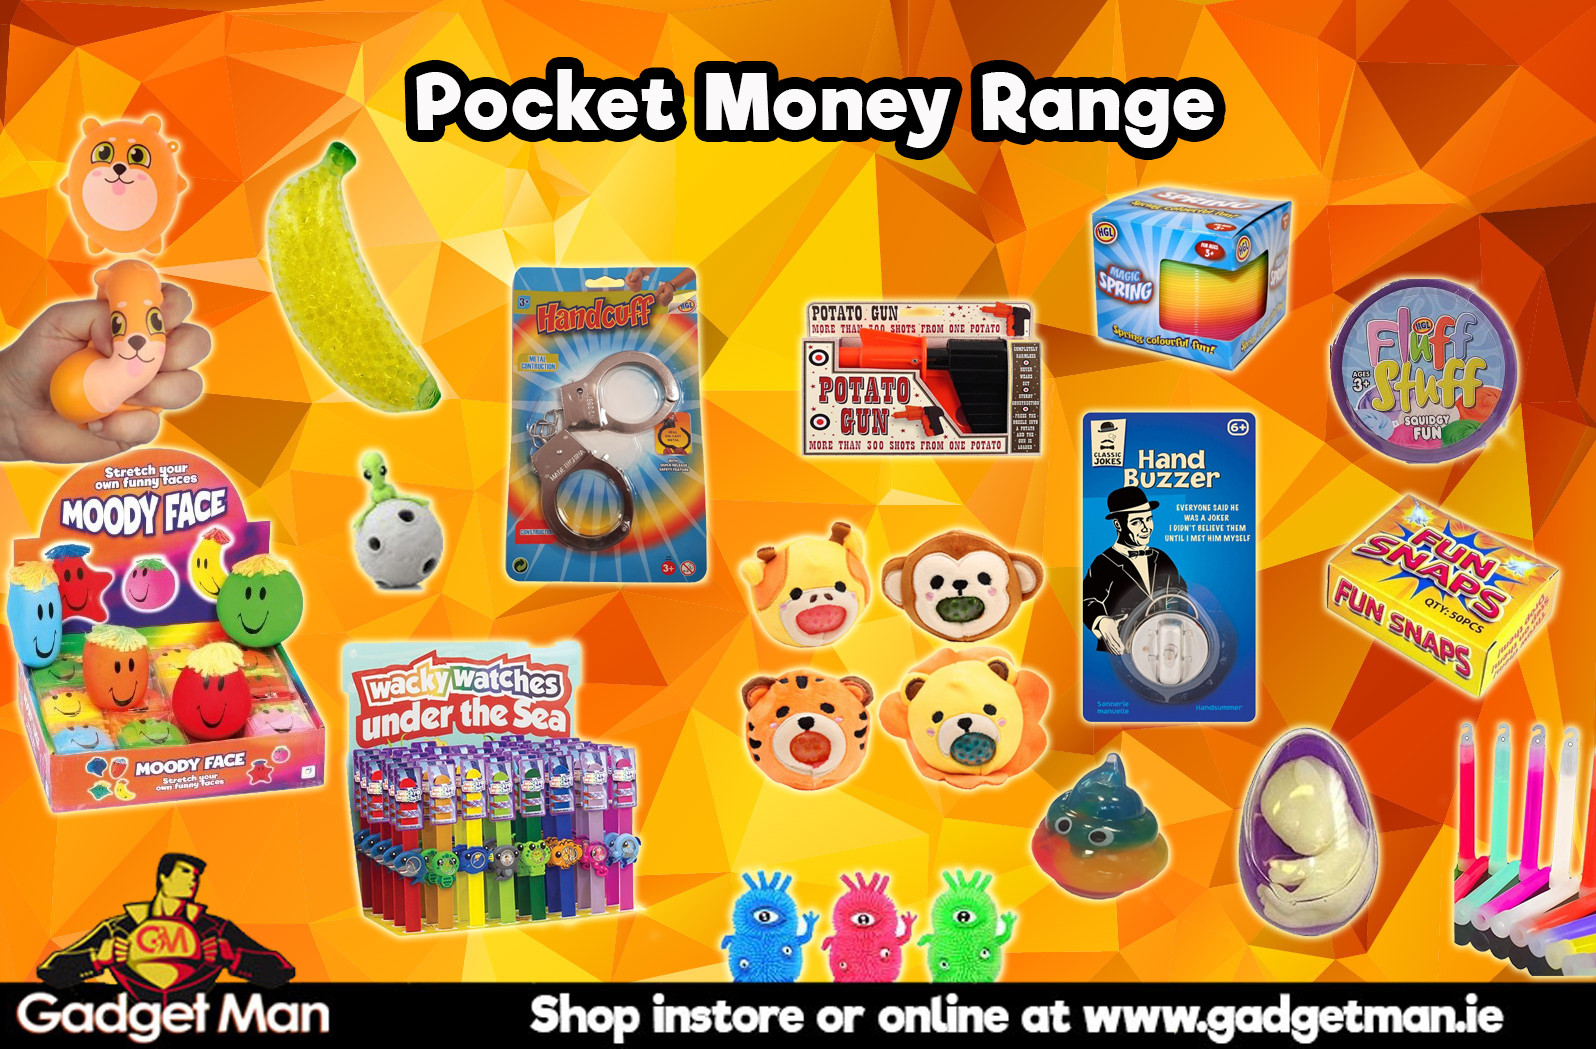 Gadget Man Ireland - Electronics, Gadgets, Gifts, Smartphones and More